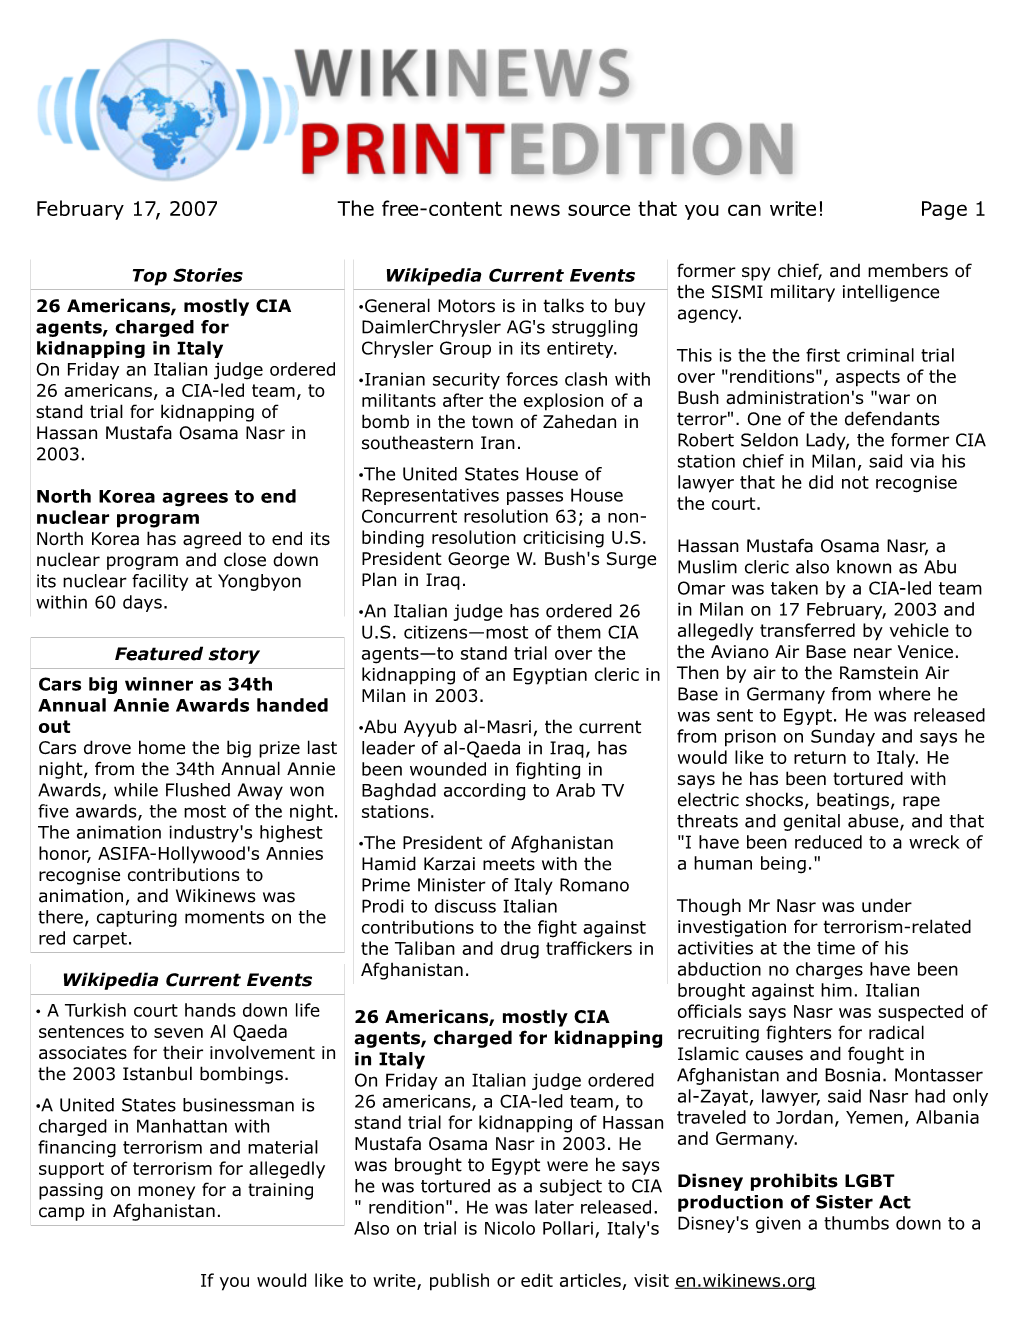 February 17, 2007 the Free-Content News Source That You Can Write! Page 1